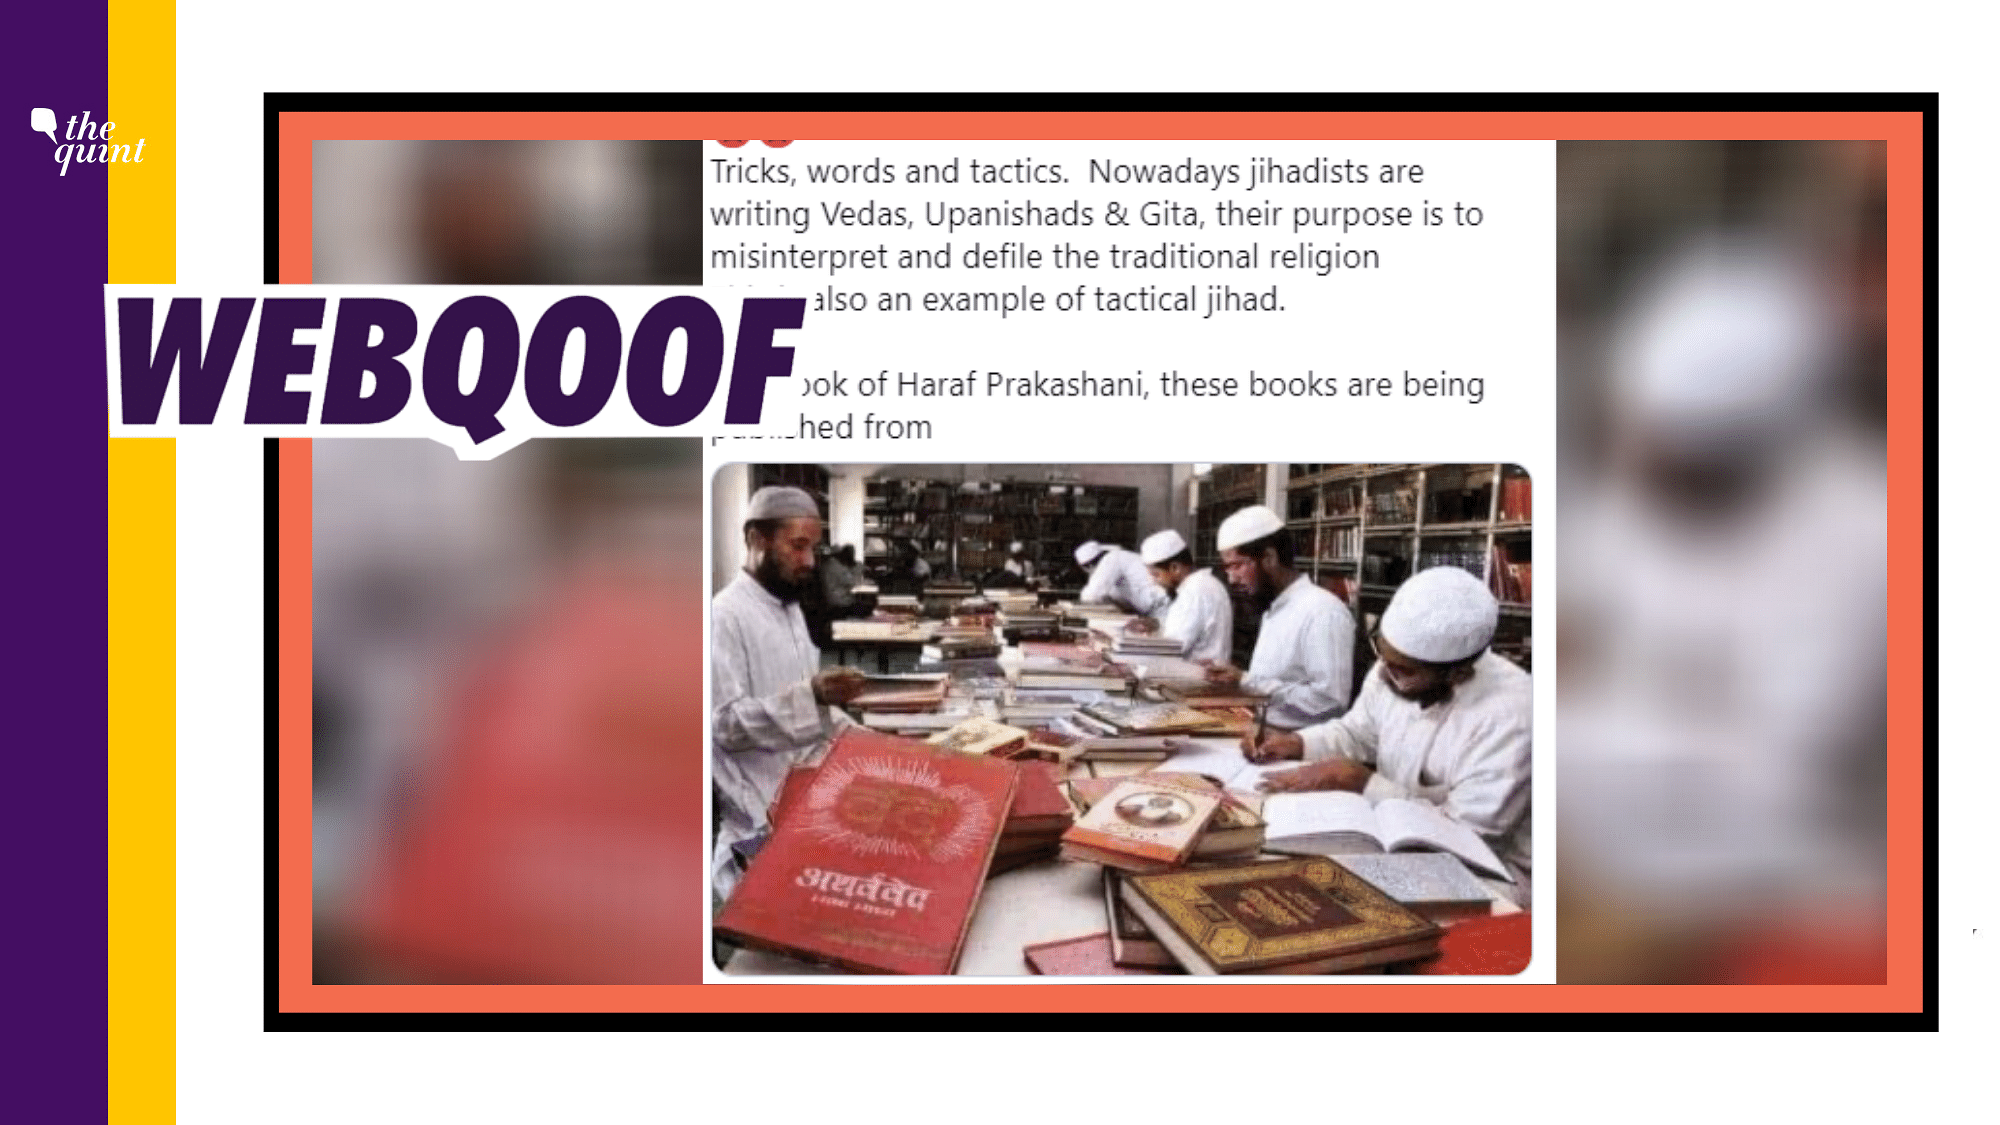 An old image of students studying Hindu texts has been falsely shared as Muslims misinterpreting the Vedas.